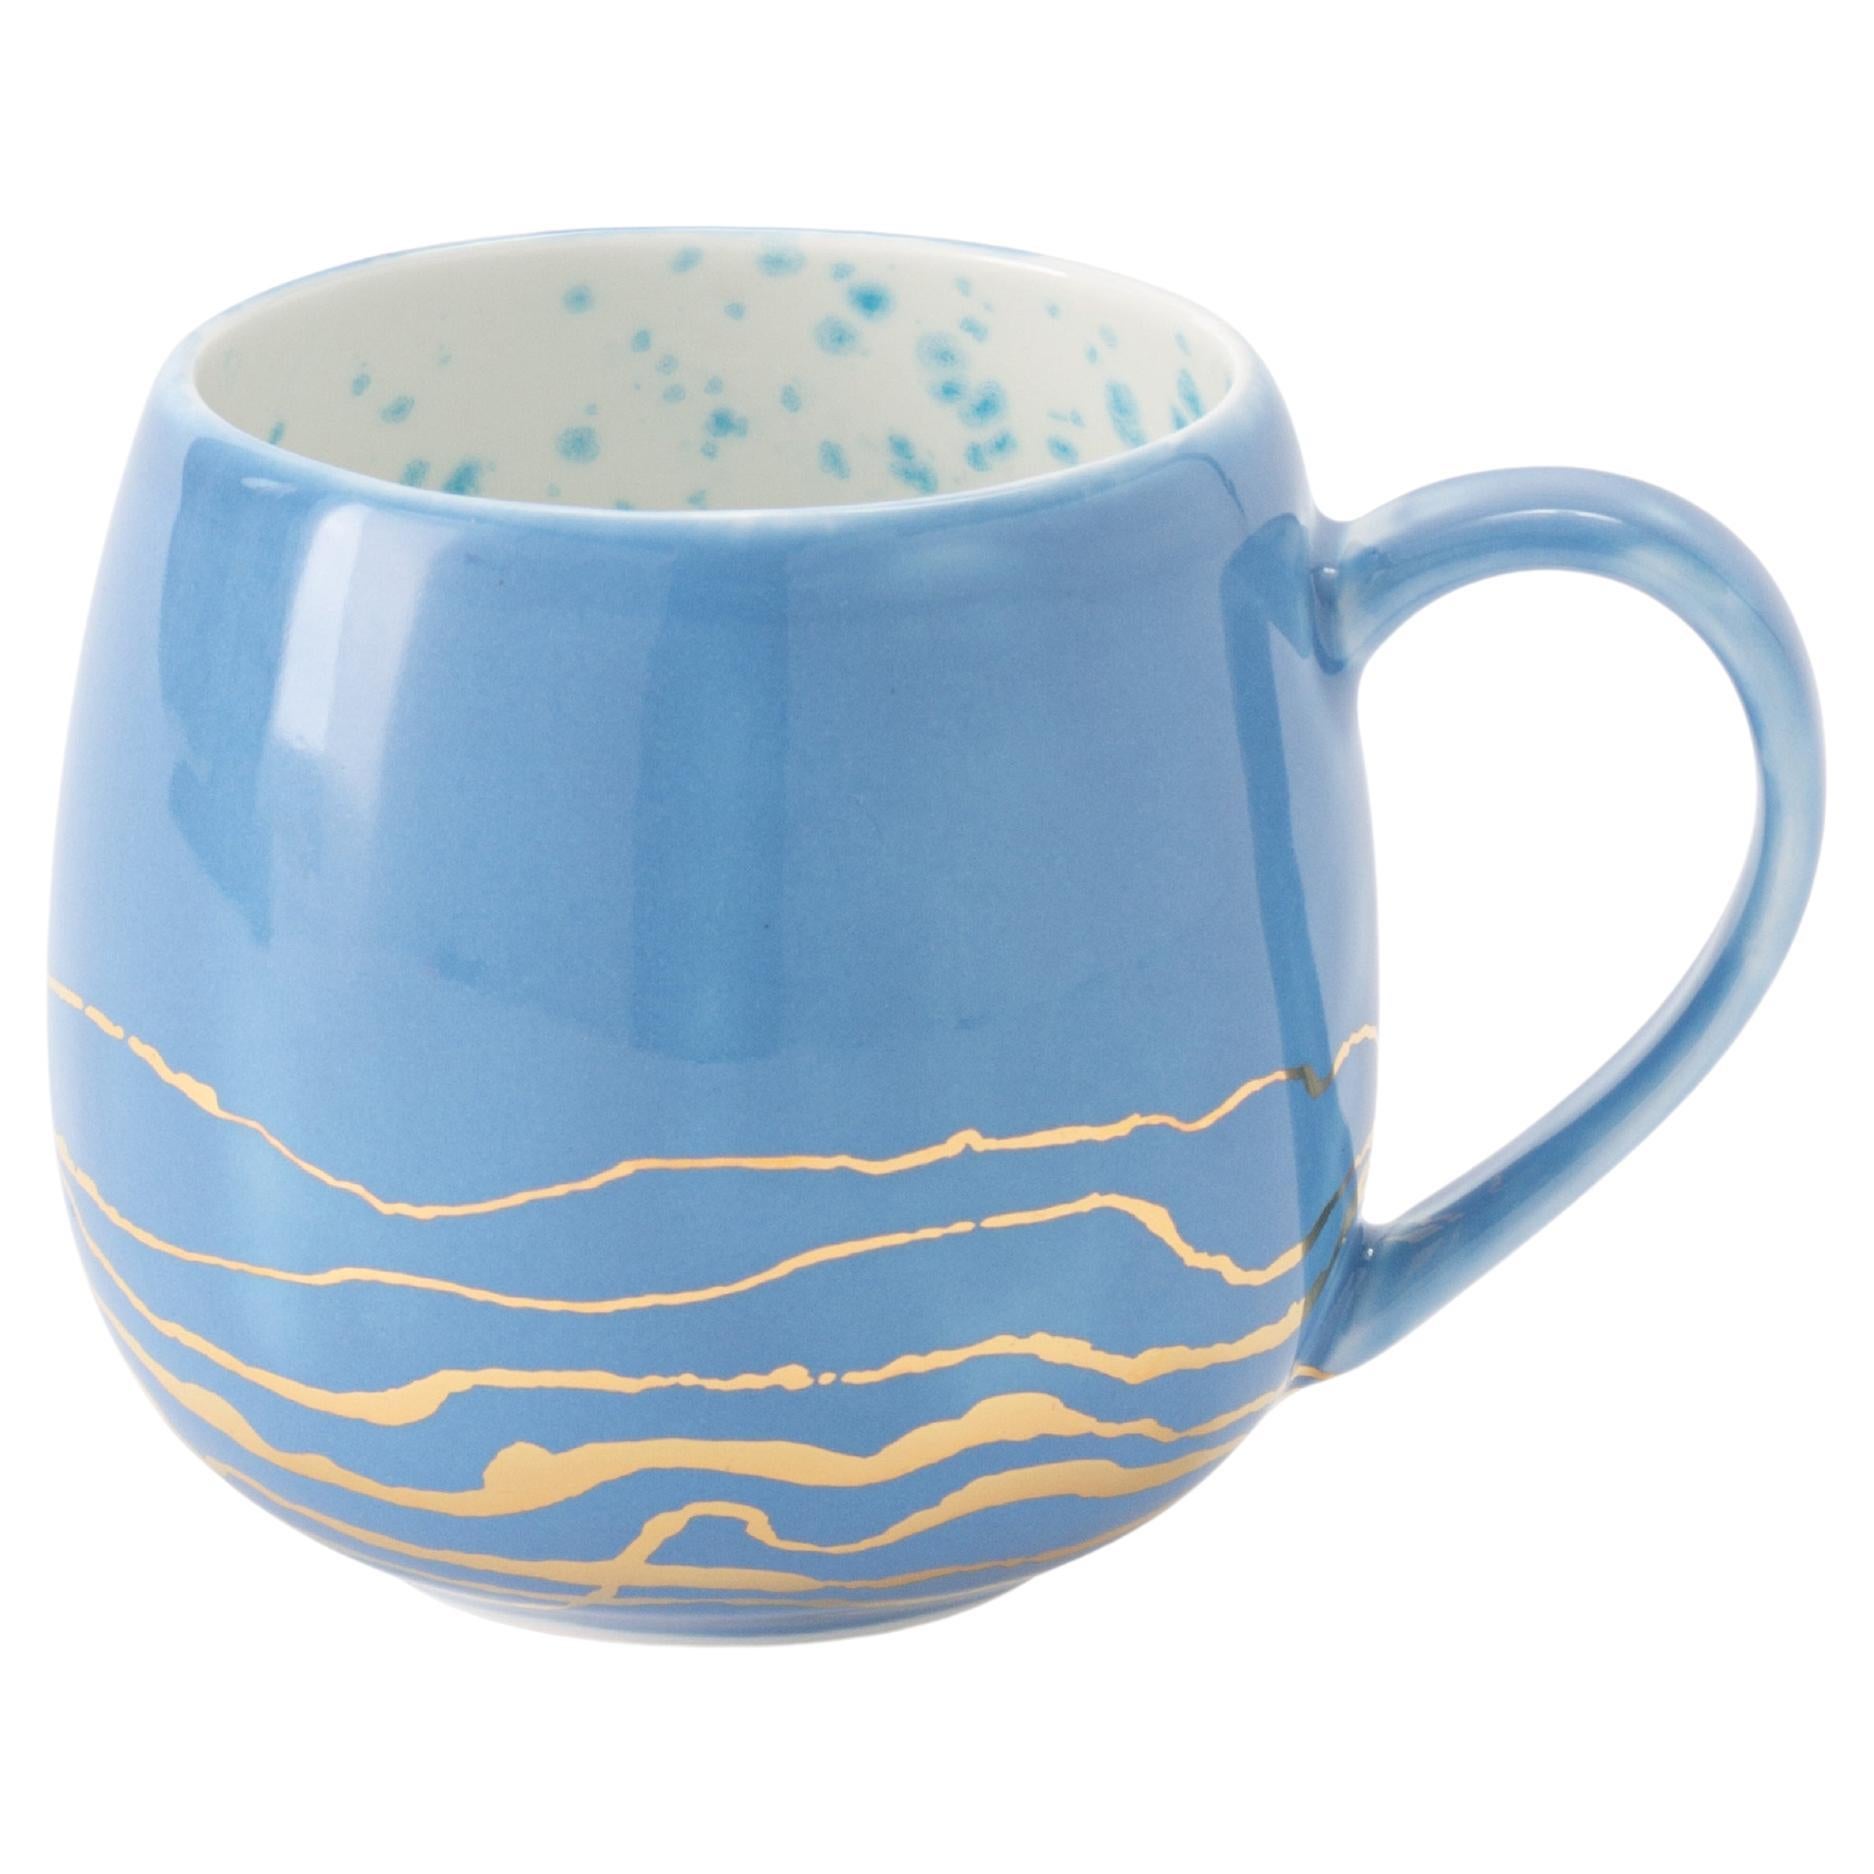 Contemporary Set of 2 Chubby Mugs Hand Painted Porcelain Blue Gold For Sale